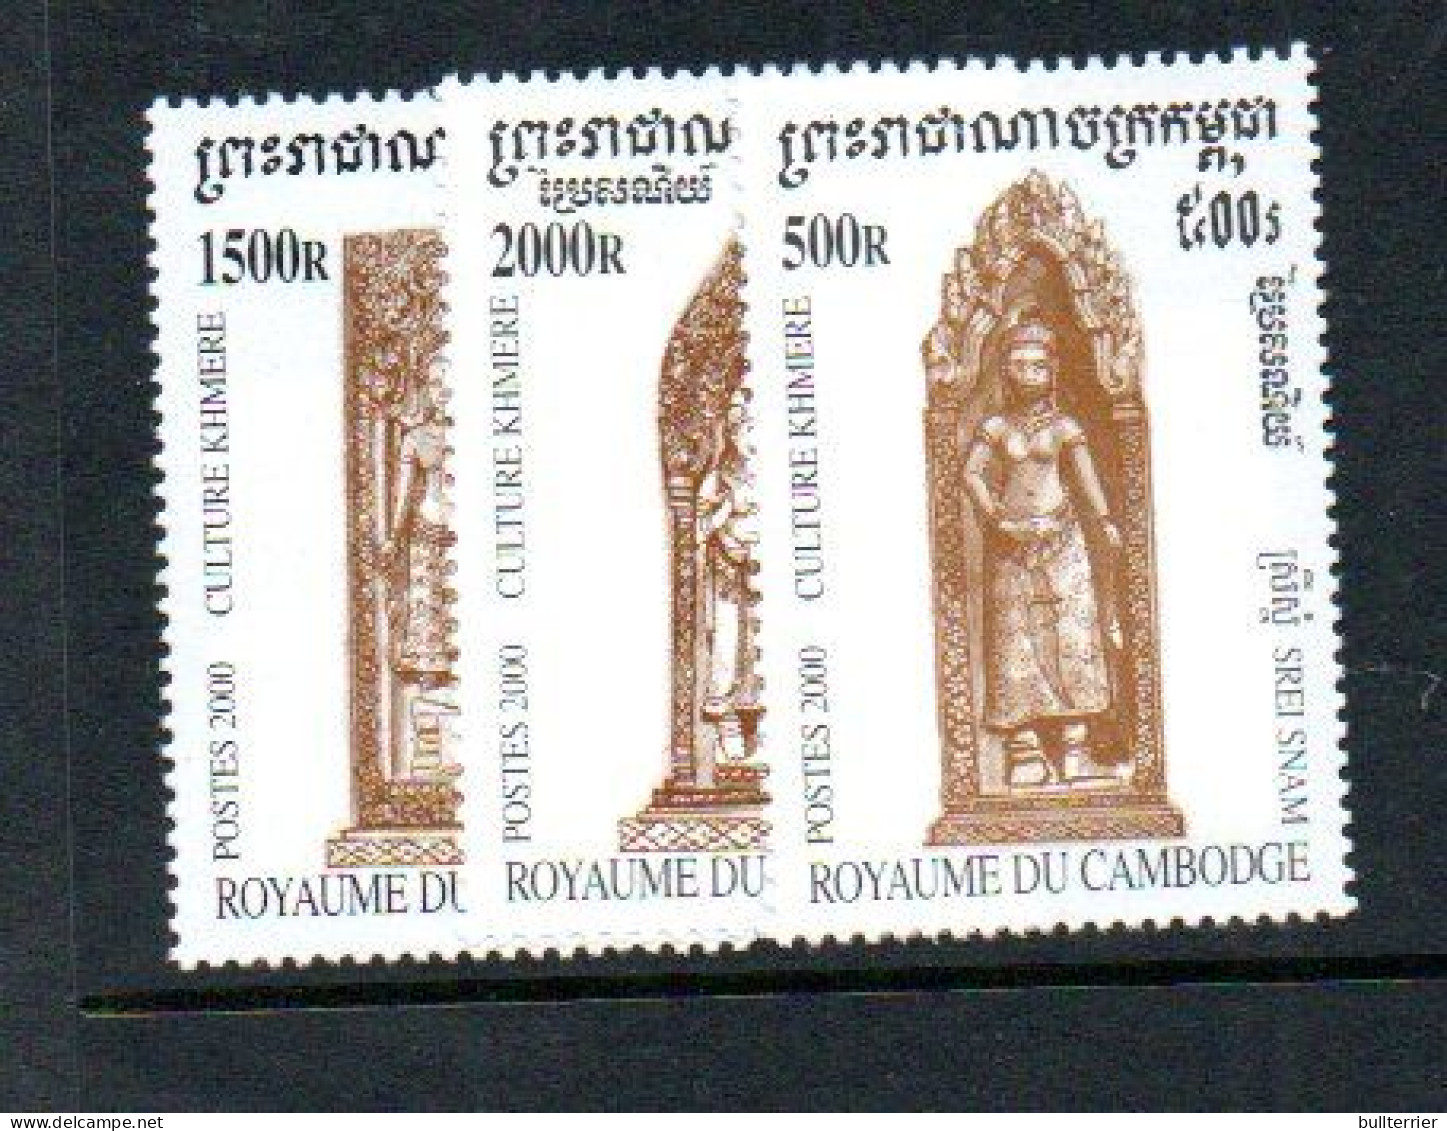 CAMBODIA - 2000  - KHMERE CULTURE ET OF 3  MINT NEVER HINGED - Cambodja